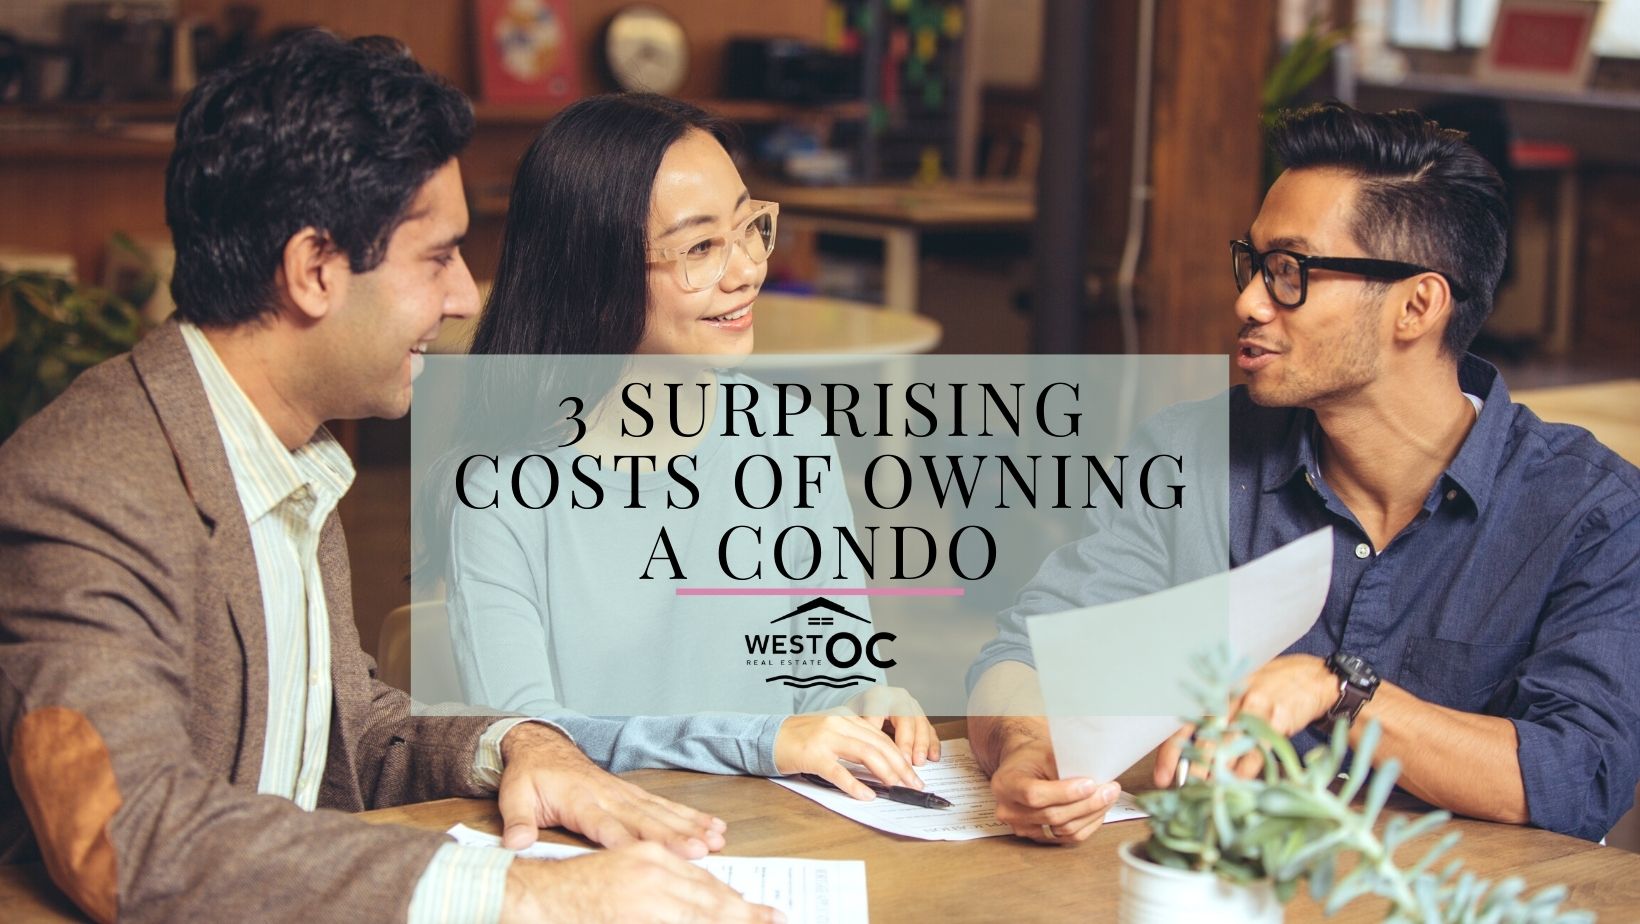 3 Surprising Costs of Owning a Condo